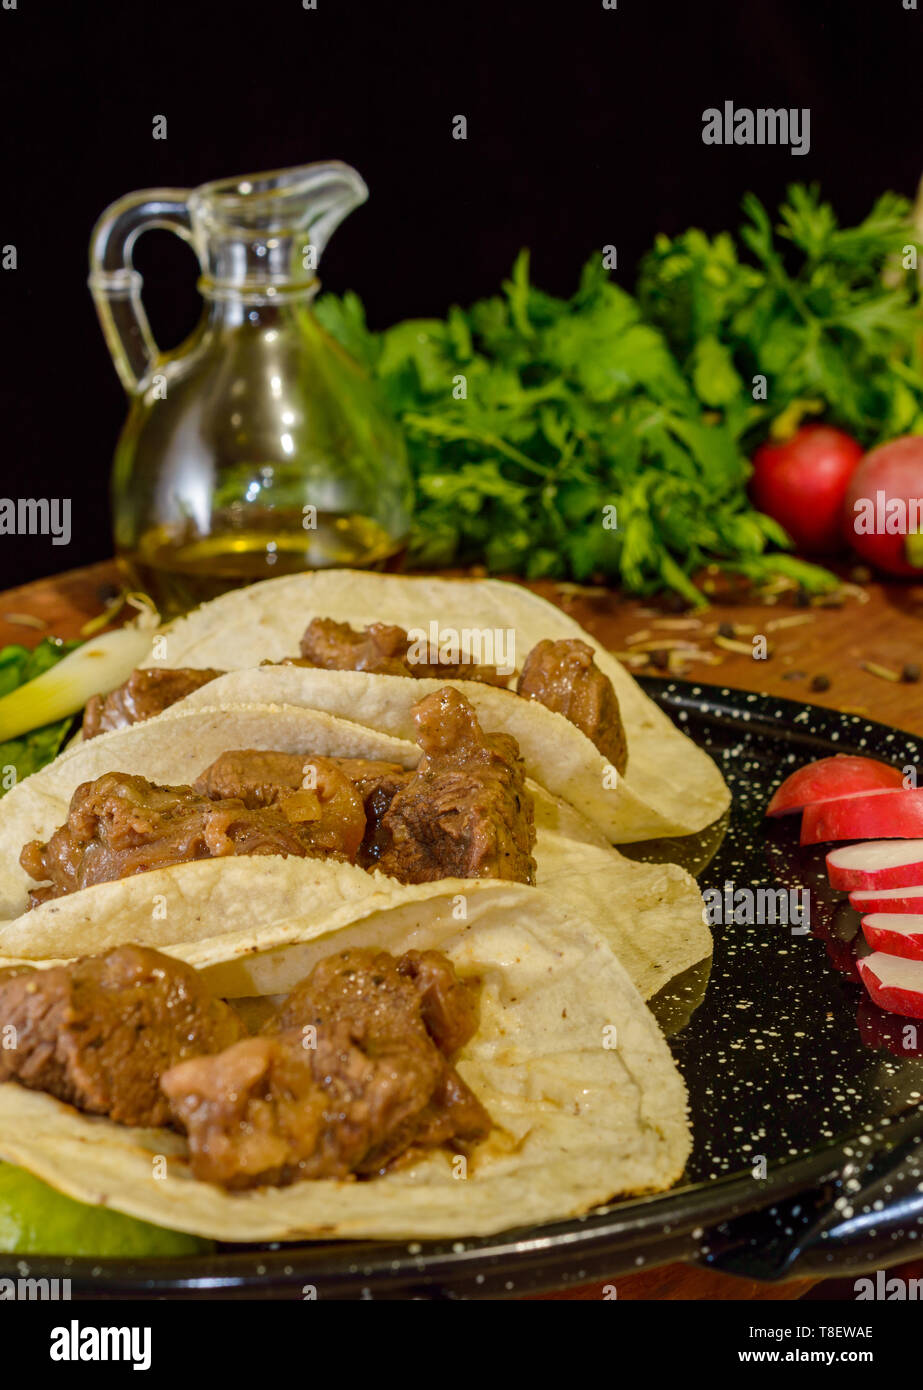 Arrachera beef tacos, Mexican food made with beer marinade and corn tortillas with copy space Stock Photo